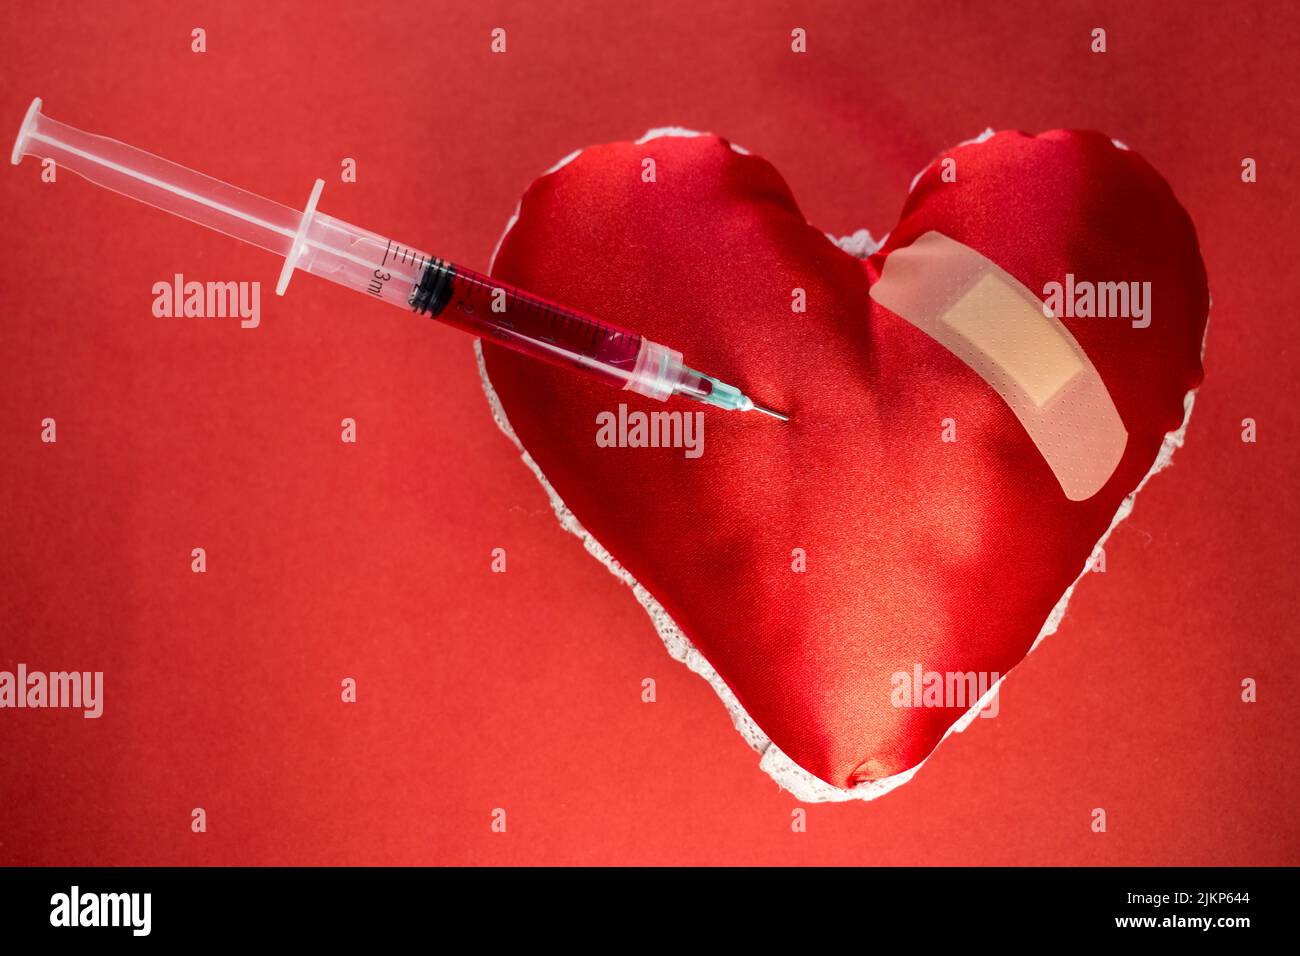 A background of blood donation theme with a syringe with blood in a heart shaped object Stock Photo